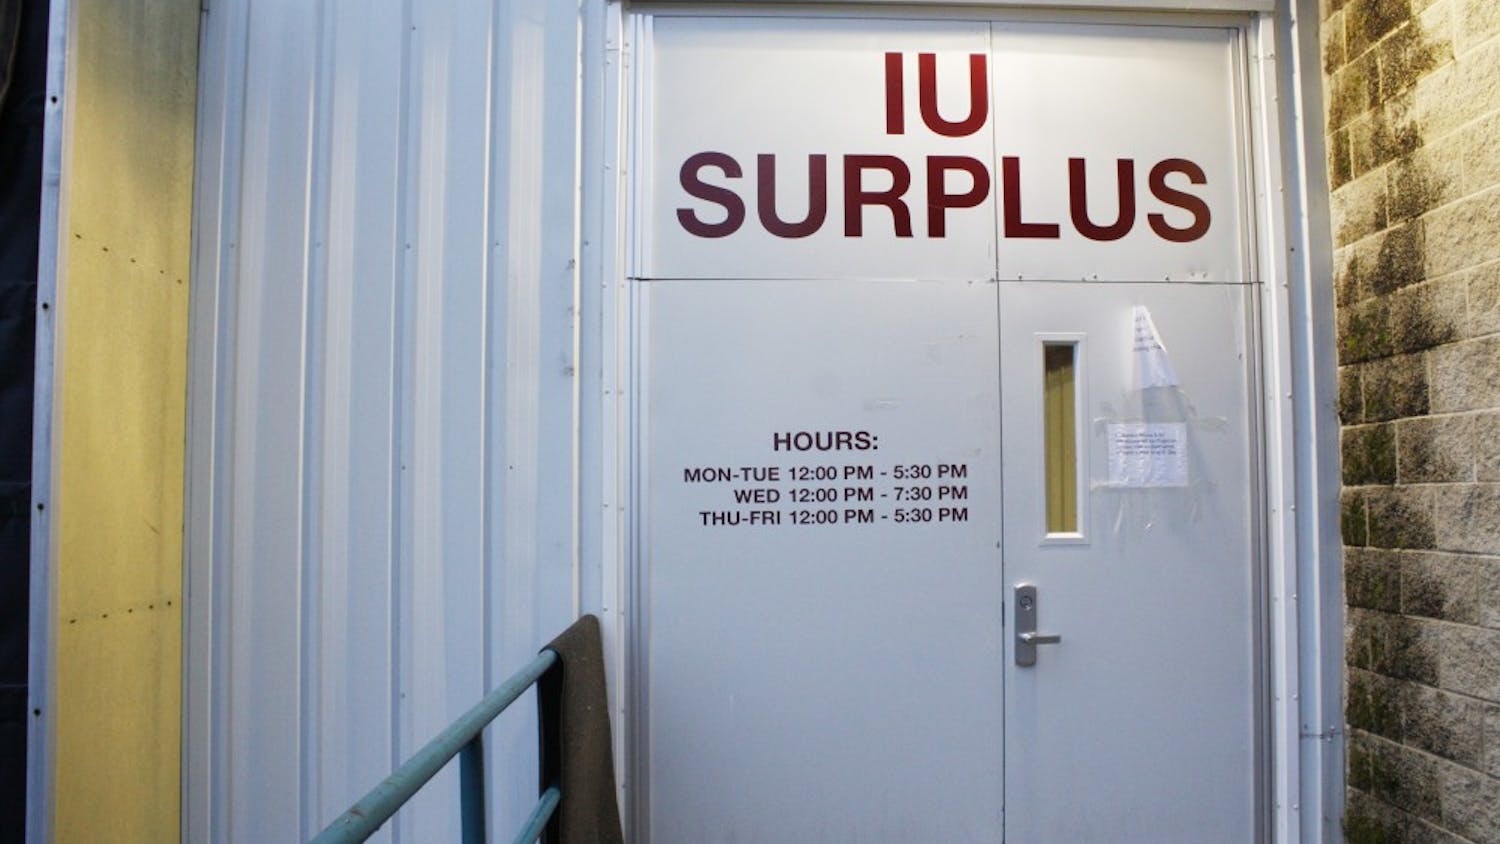 The front doors of Indiana University Surplus Stores display the store's hours. The store is only open Monday through Friday. Monday, Tuesday, Thursday and Friday the store is open 12 - 5:30 p.m., and Wednesday 12 - 7:30 p.m. The warehouse is located at 2931 E 10th Street.